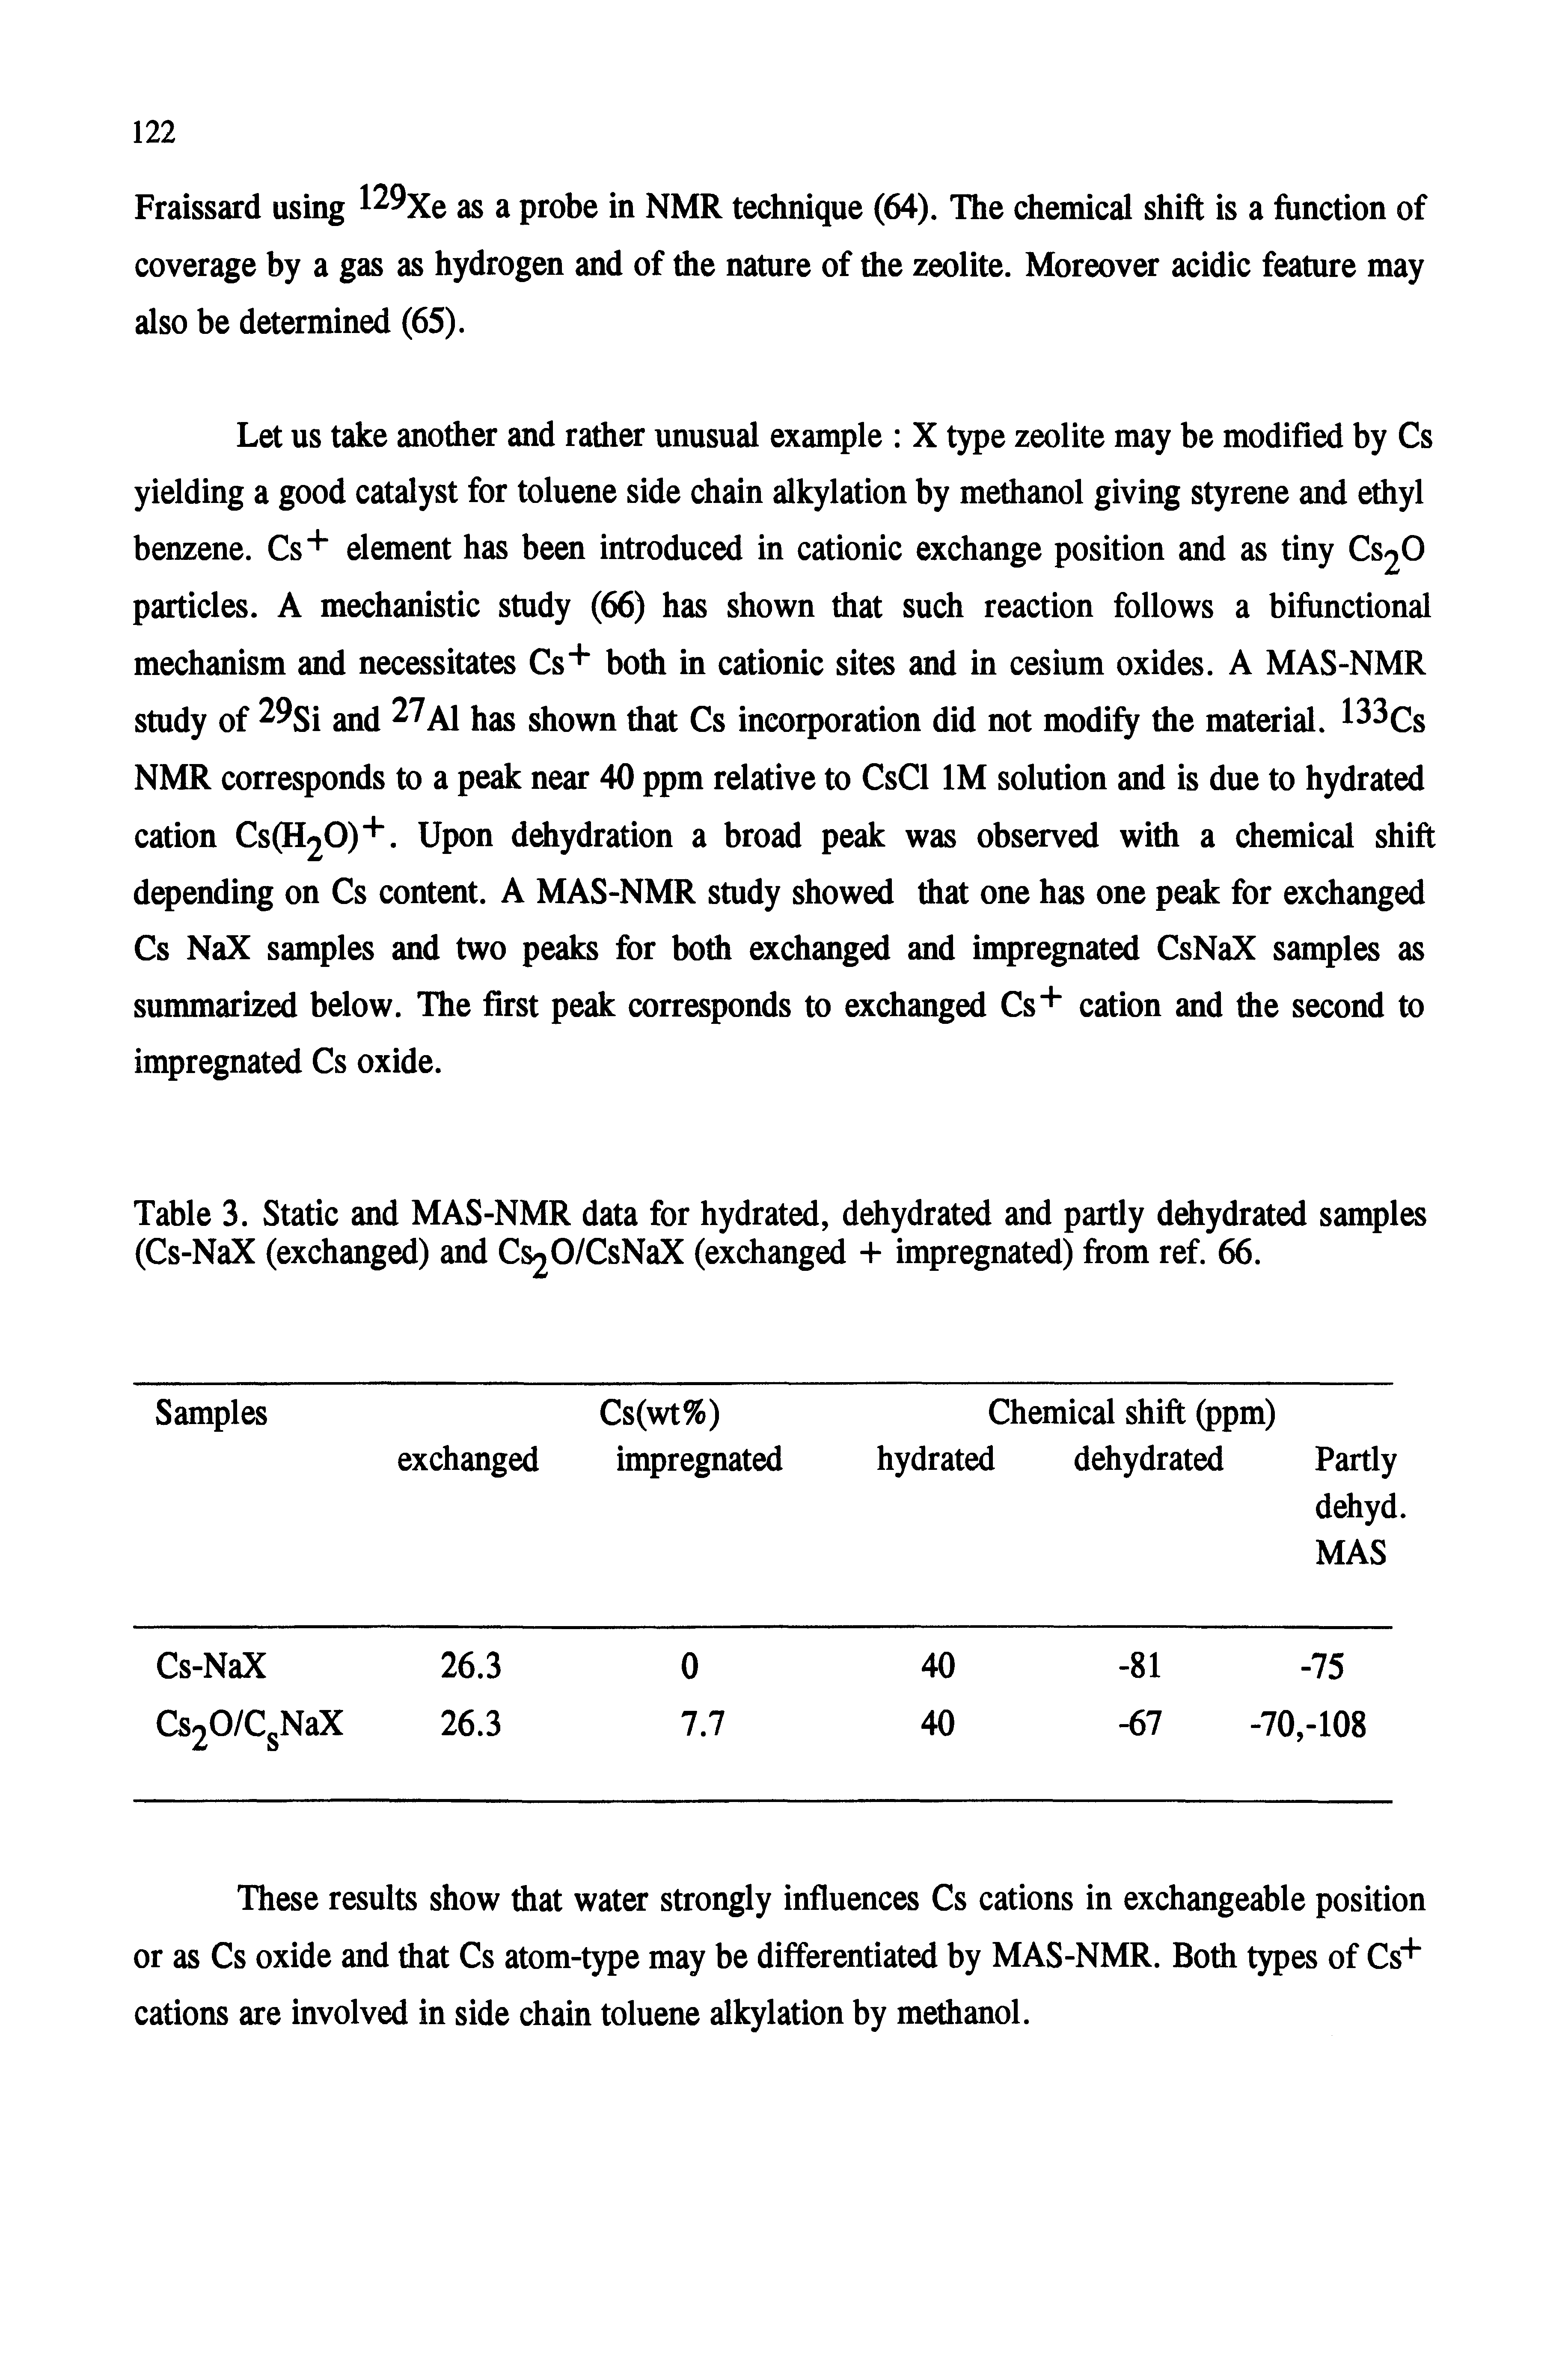 Table 3. Static and MAS-NMR data for hydrated, dehydrated and partly ddiydrated samples (Cs-NaX (exchanged) and Cs20/CsNaX (exchang + impregnated) from ref. 66.